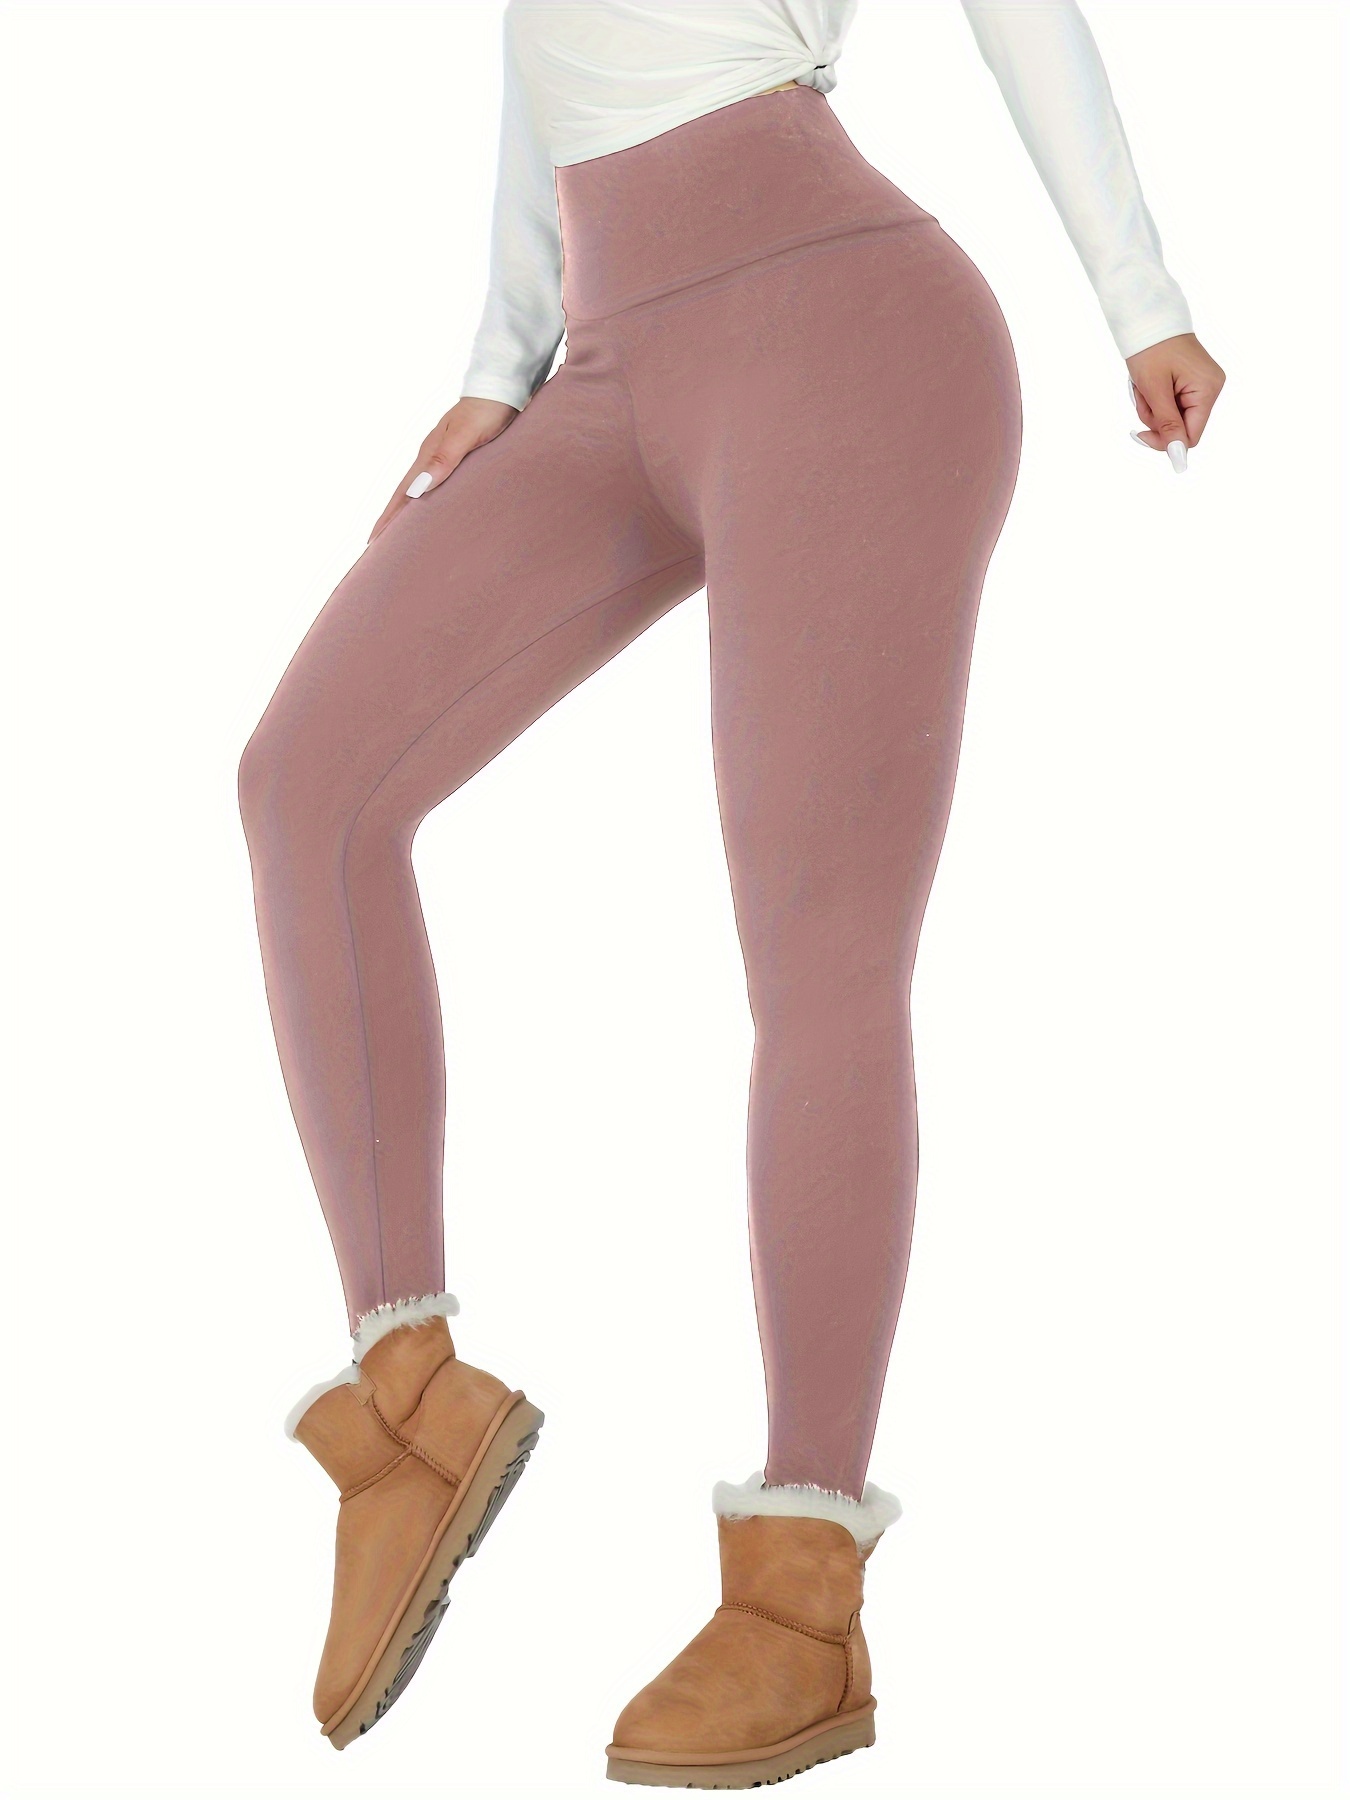 CAICJ98 Womens Leggings High Waisted Lined Leggings Women Water Resistant  Warm Running Pants Thermal Insulated Hiking Leggings with Pockets Pink,XL 